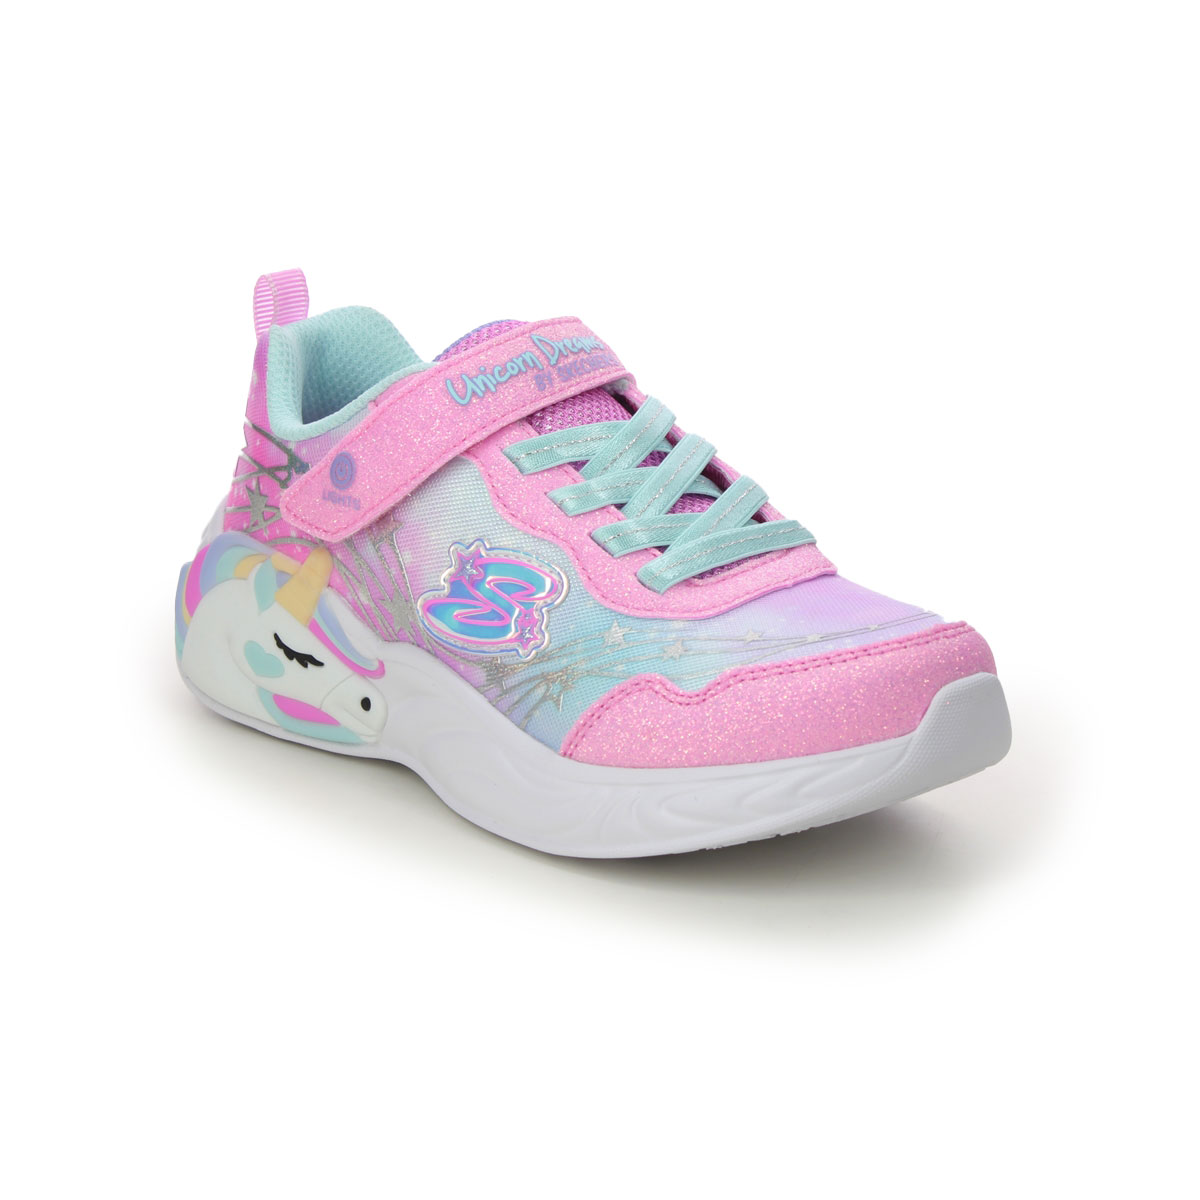 Skechers Unicorn Dreams PKTQ Pink Turquoise Kids girls trainers 302299L in a Plain Textile in Size 29